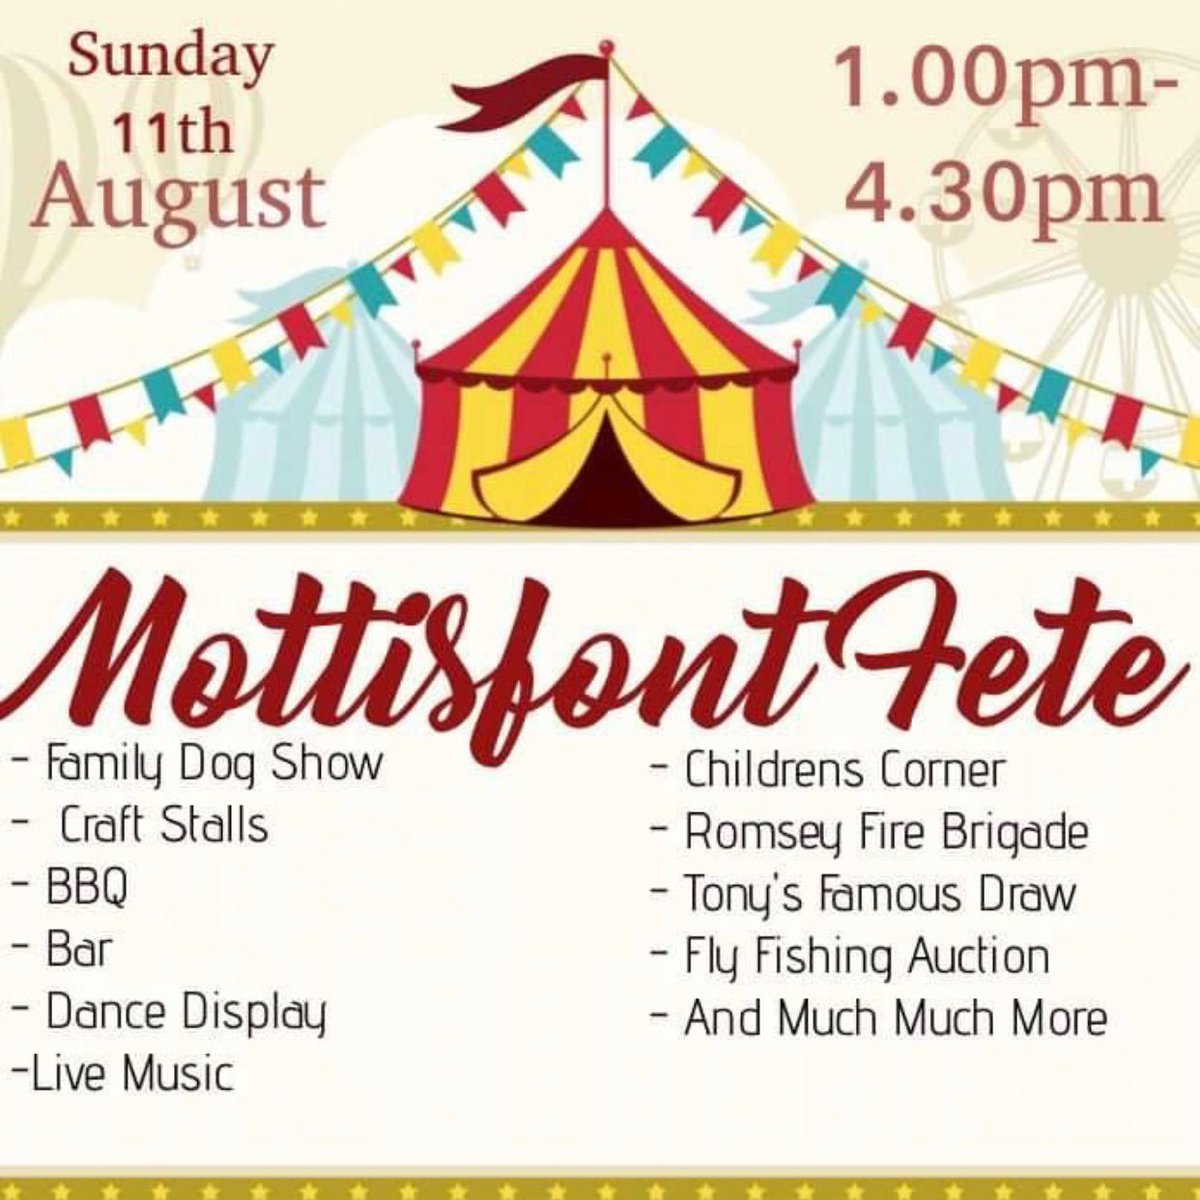 We’re playing next Sunday at Mottisfont Fete -  one down and support the village and enjoy a fun day out!! #swedishkeith #hampshire #romsey @destinationroms @MottisfontNT @romseyadv @HampshireEvents